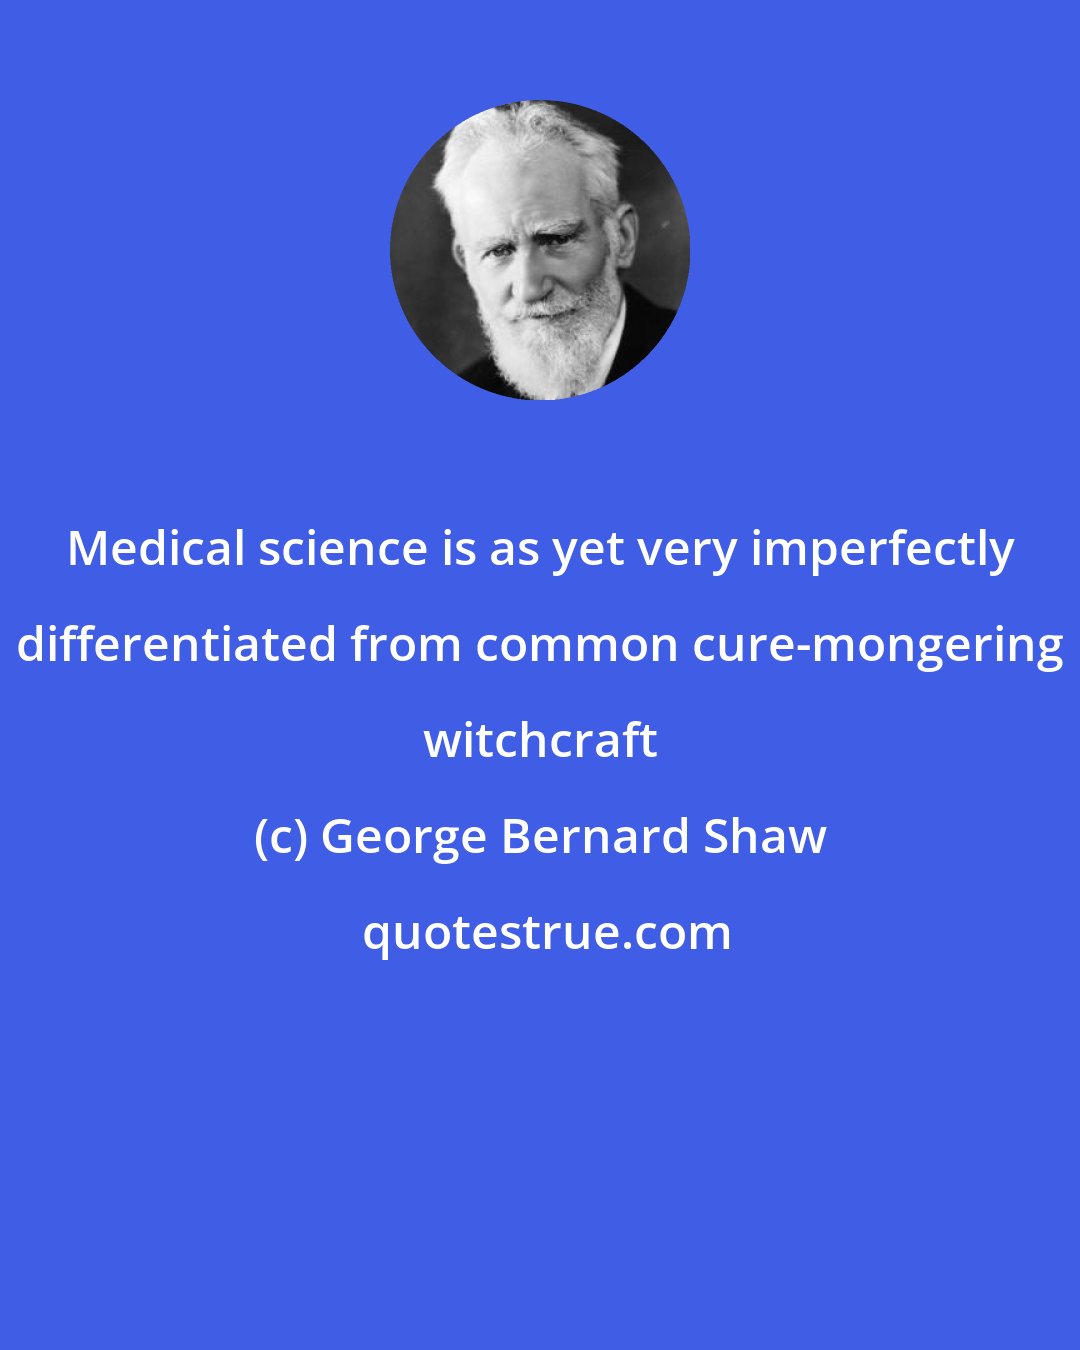 George Bernard Shaw: Medical science is as yet very imperfectly differentiated from common cure-mongering witchcraft